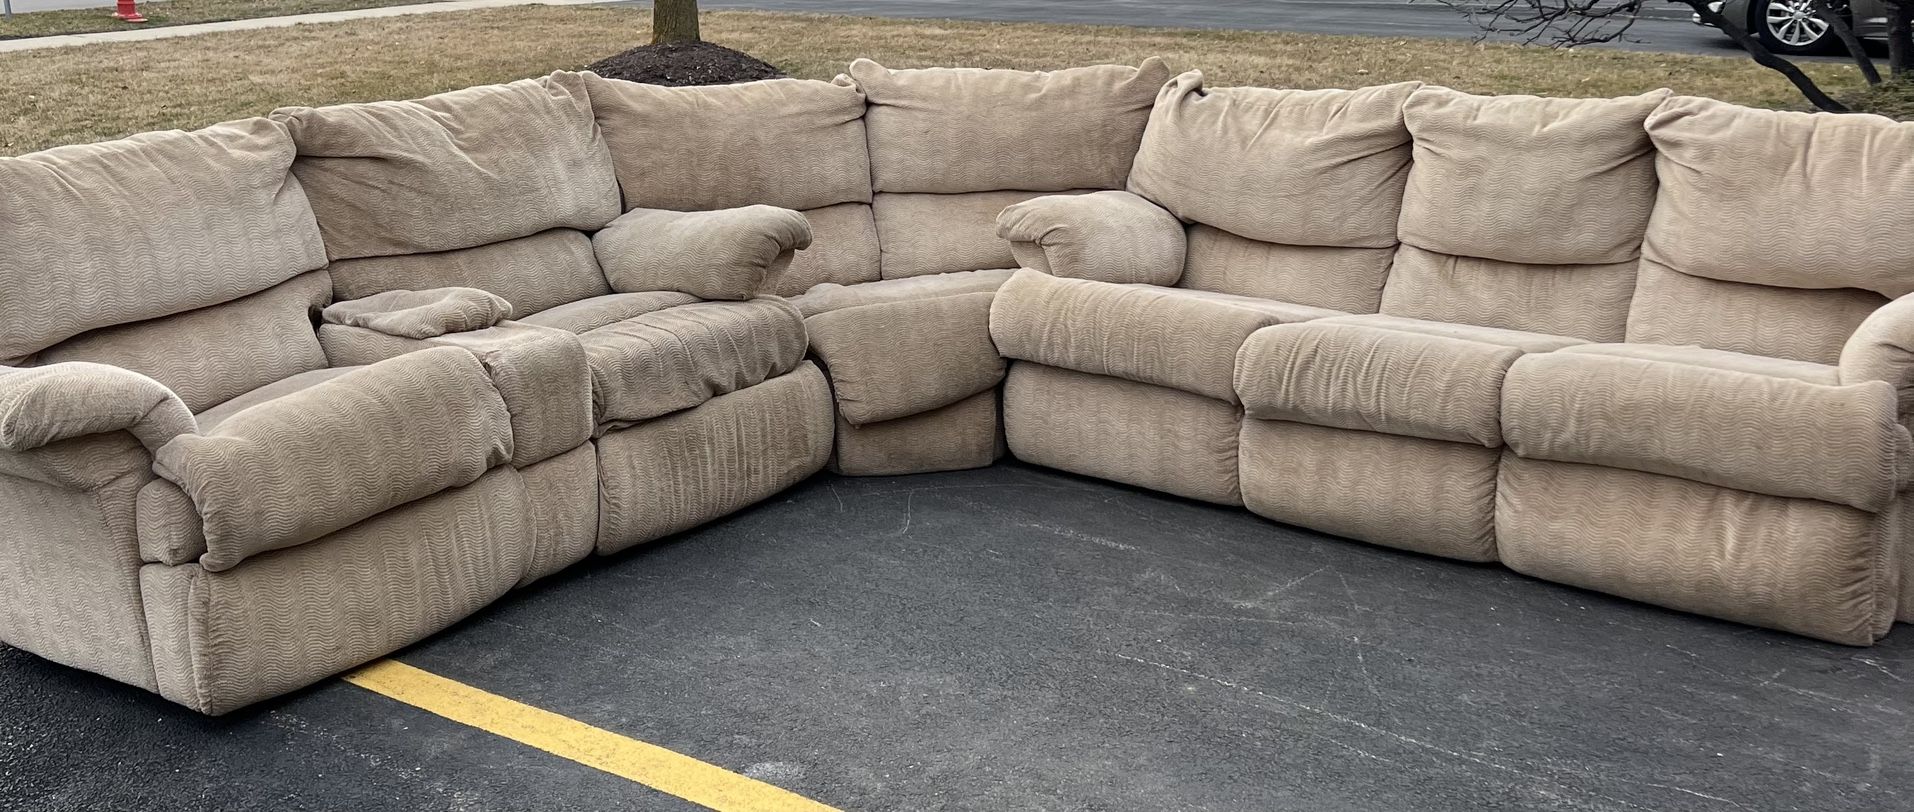 Light Brown Sectional Reclining Couch Set With Pull Out Bed 